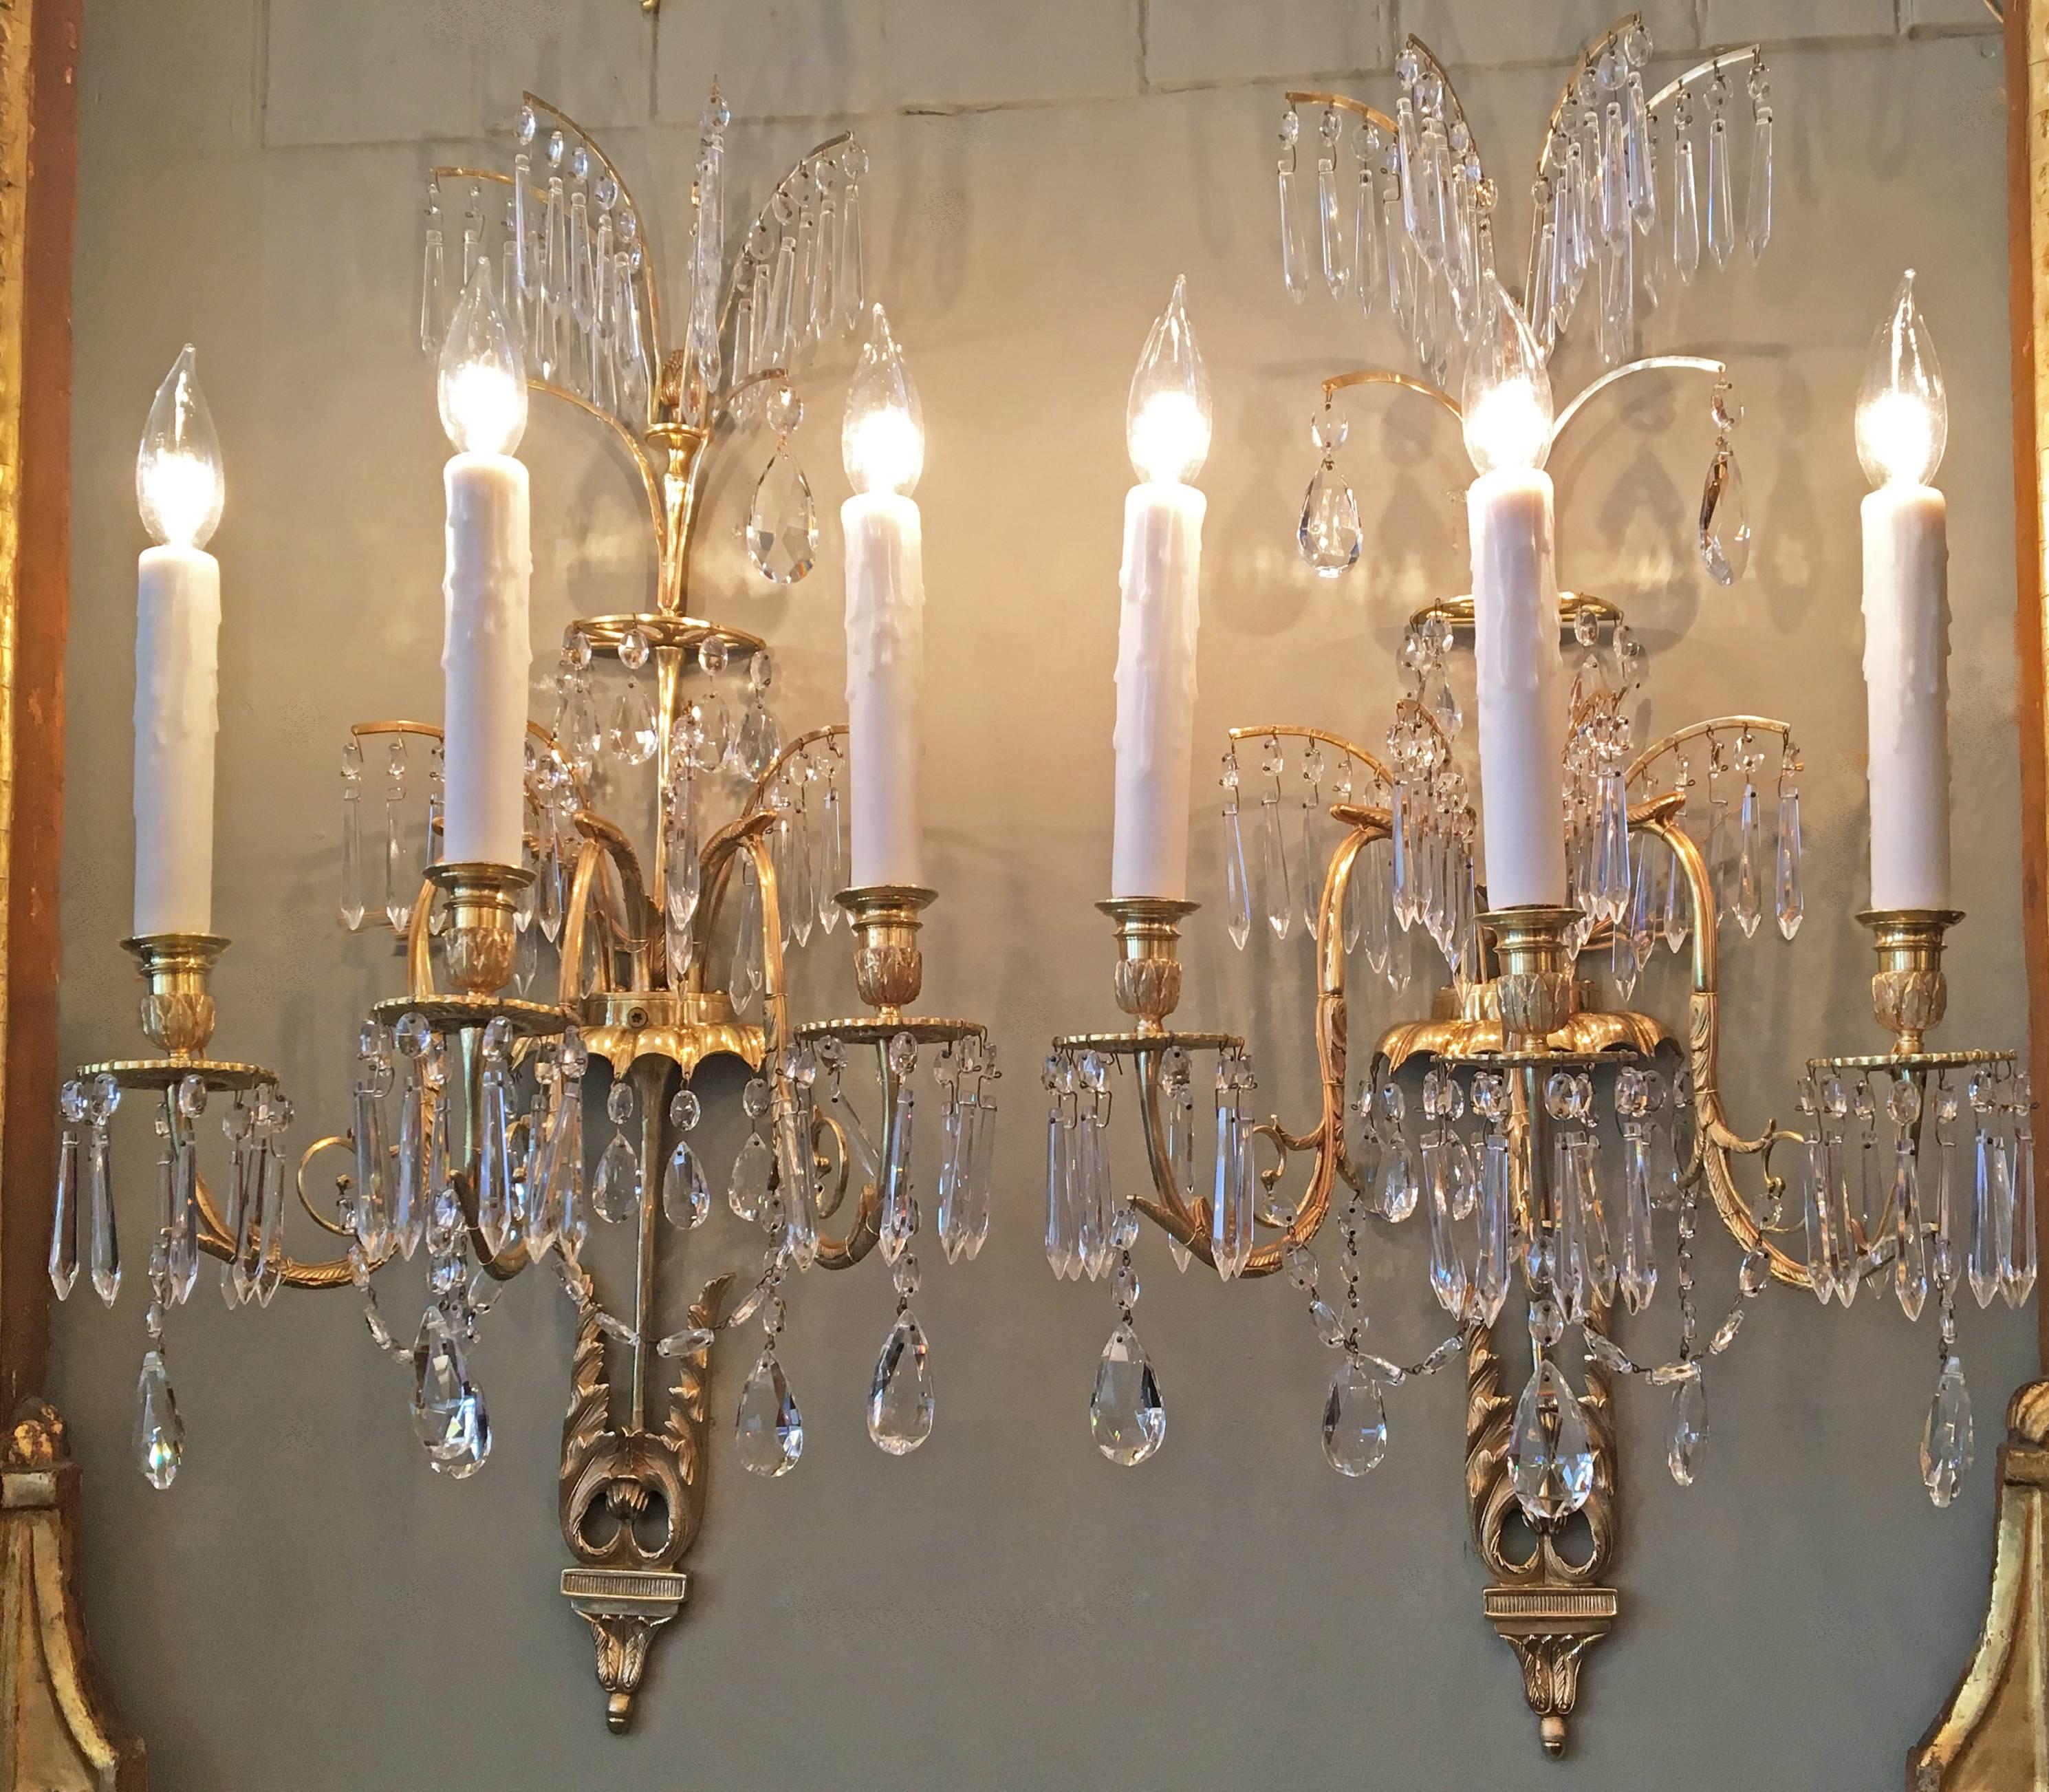 These elegant Russian/Baltic sconces are doré bronze and crystal with three lights. These Neoclassical sconces have Chinoiserie design. 

The frame has six bronze and crystal feathers above bronze filigree half-ring with crystal prisms followed by